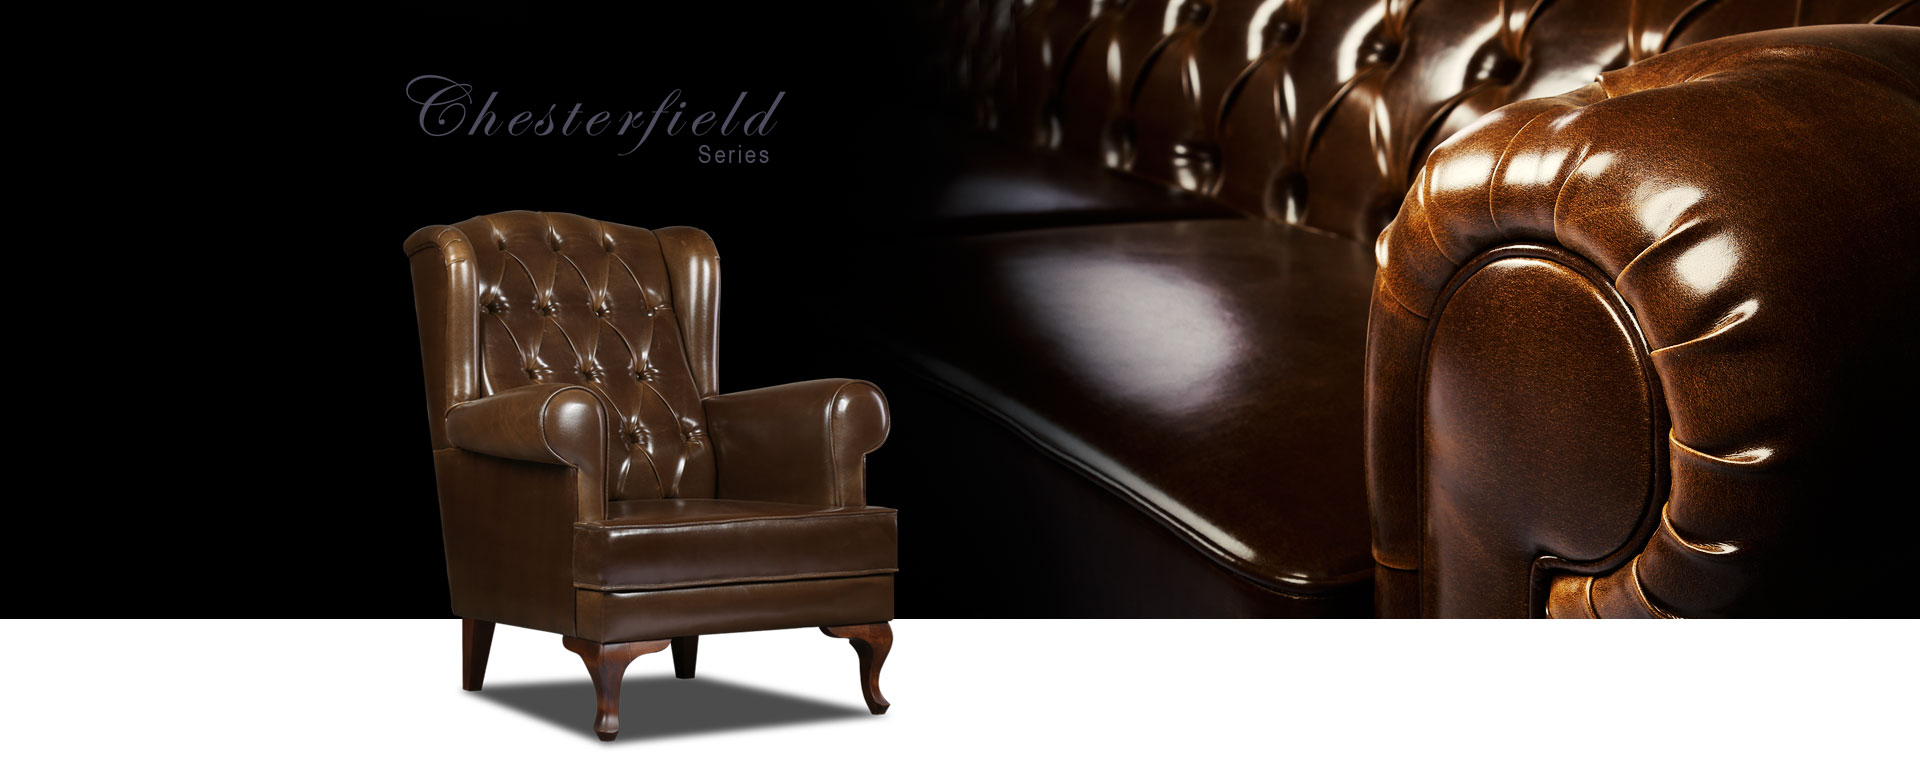 Chesterfield Series